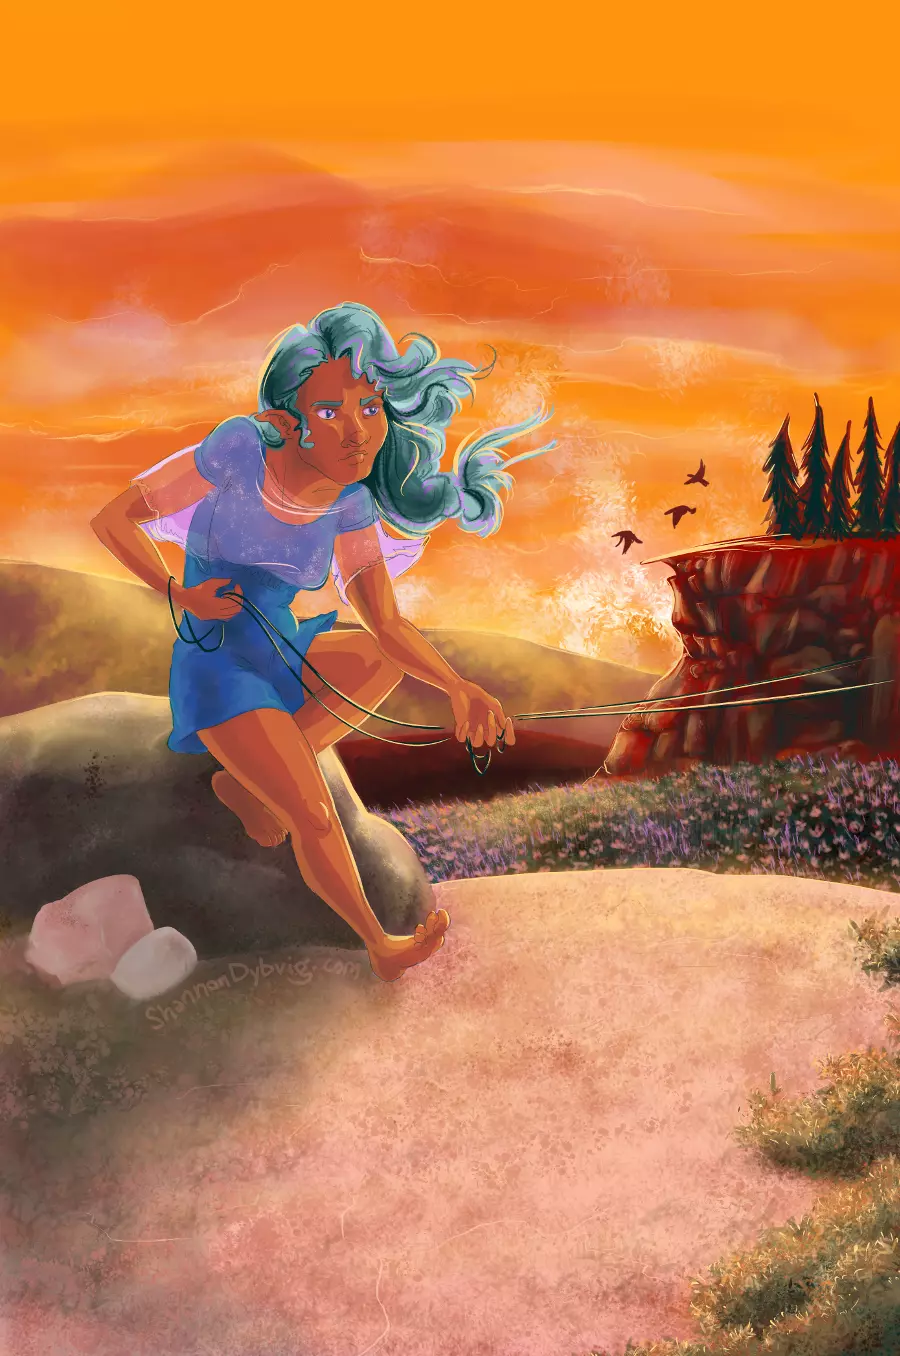 Greta flies a kite against a fiery orange sunset. She has a look of determination on her face, as though she's unaware of the majestic landscape around her.